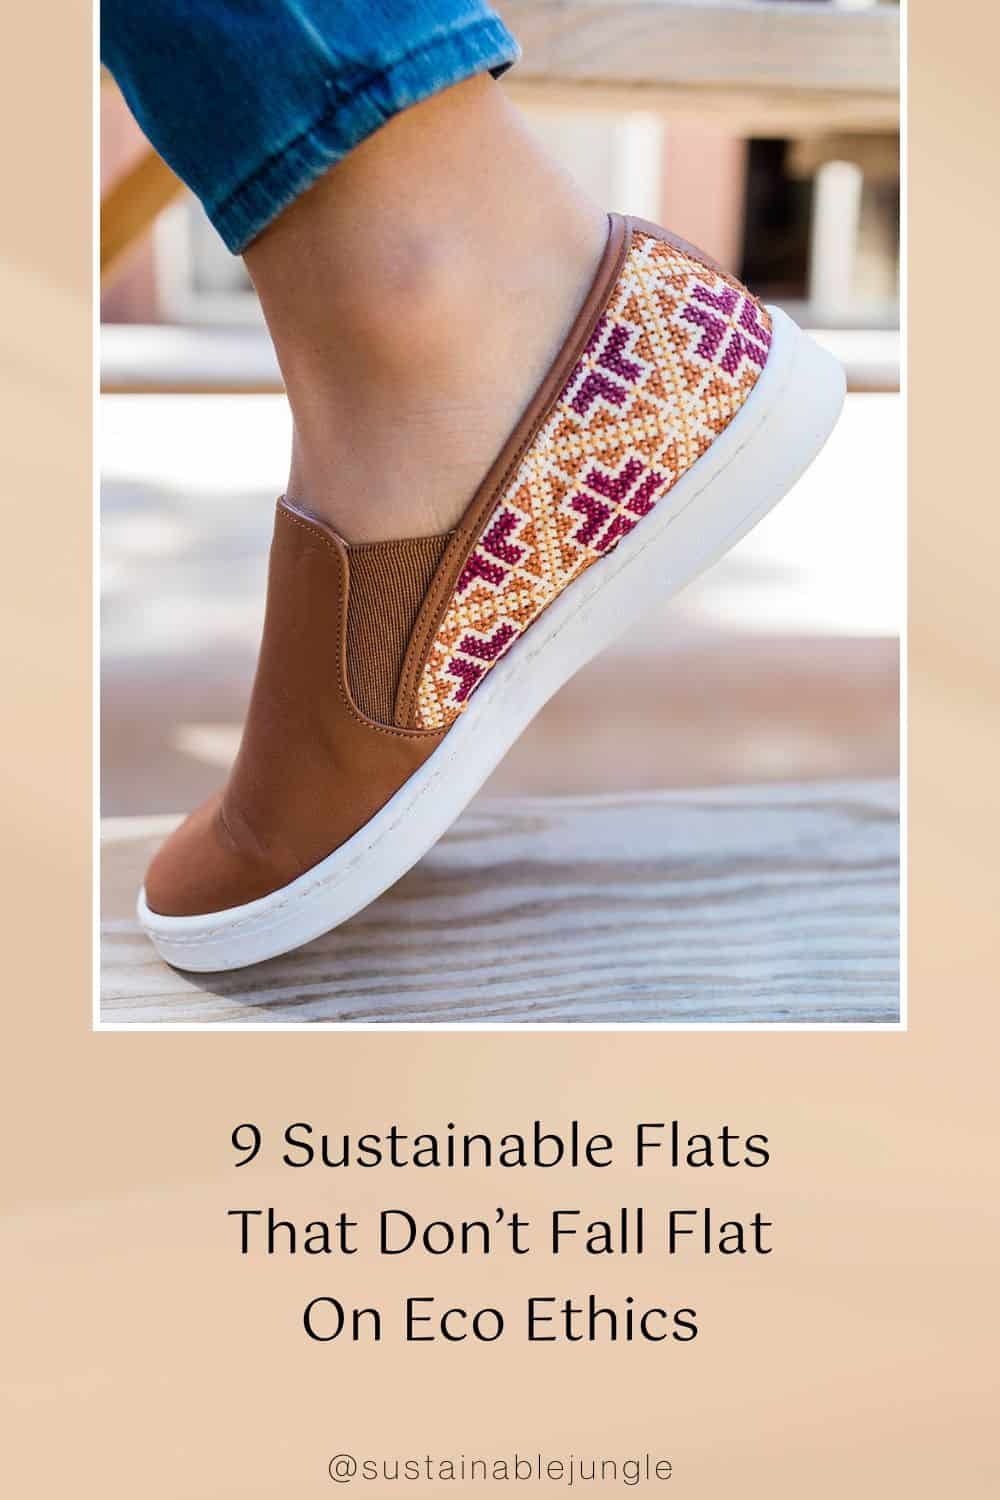 9 Sustainable Flats That Don’t Fall Flat On Eco Ethics Image by Darzah #sustainableflats #ecofriendlyflats #sustainableballetflats #ecofriendlyflats #recycledflats #sustainablewomensflats #sustainablejungle